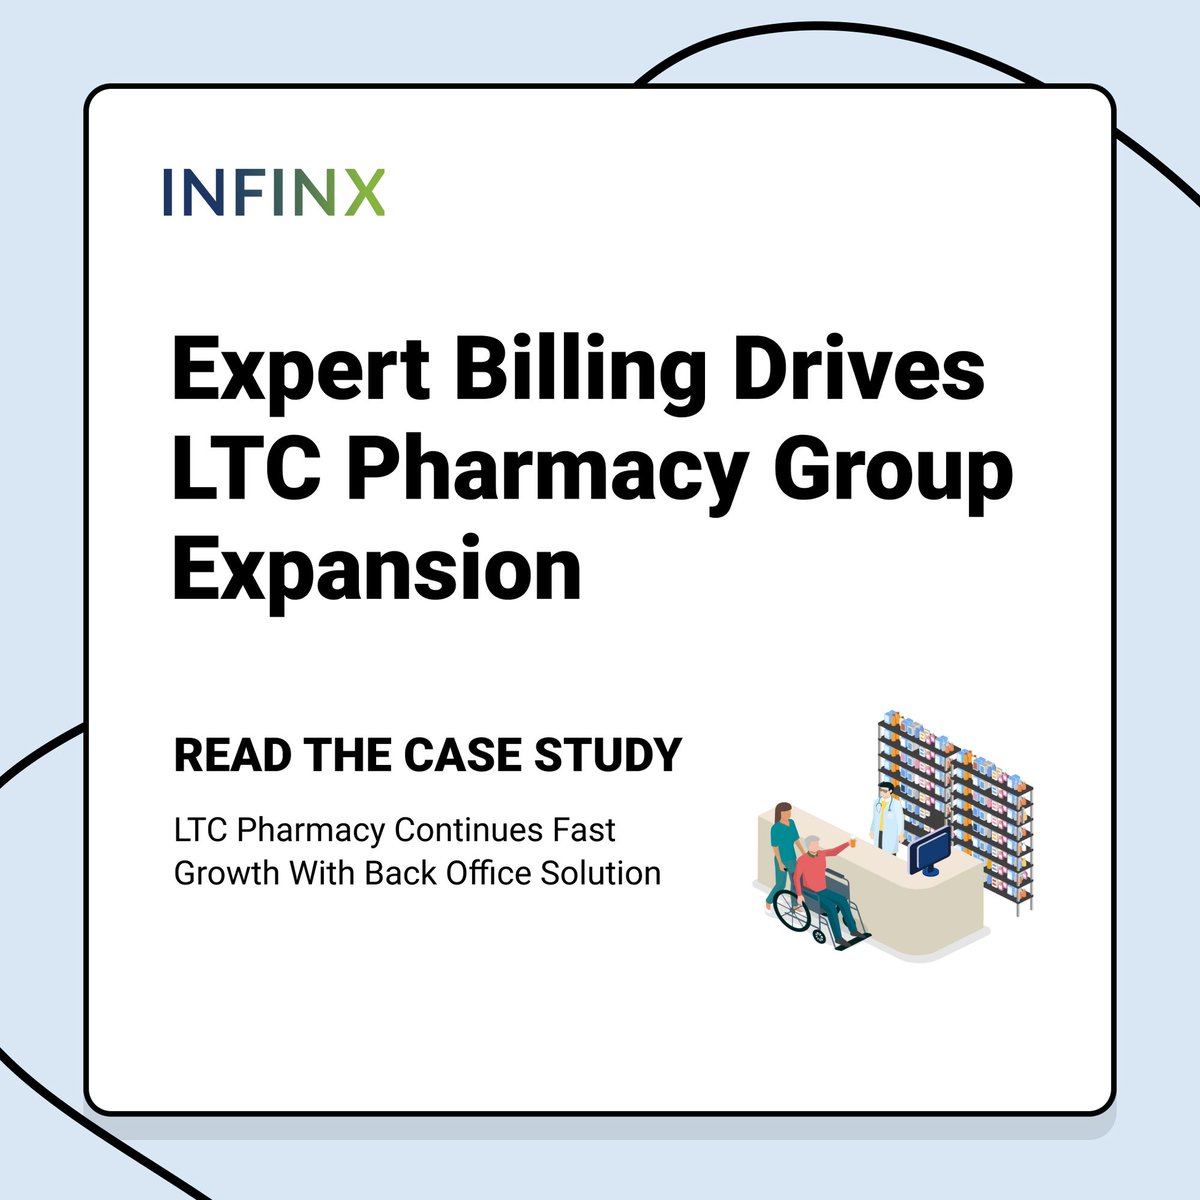 A LTC pharmacy struggled to scale their billing - hidden costs and staff turnover soaring with an outsourcing partner.

They turned to us, and we charge only when production exceeds billable amounts.

hubs.li/Q02m5cYm0

#LTCPharmacy #PharmacyBilling #RCMOutsourcing